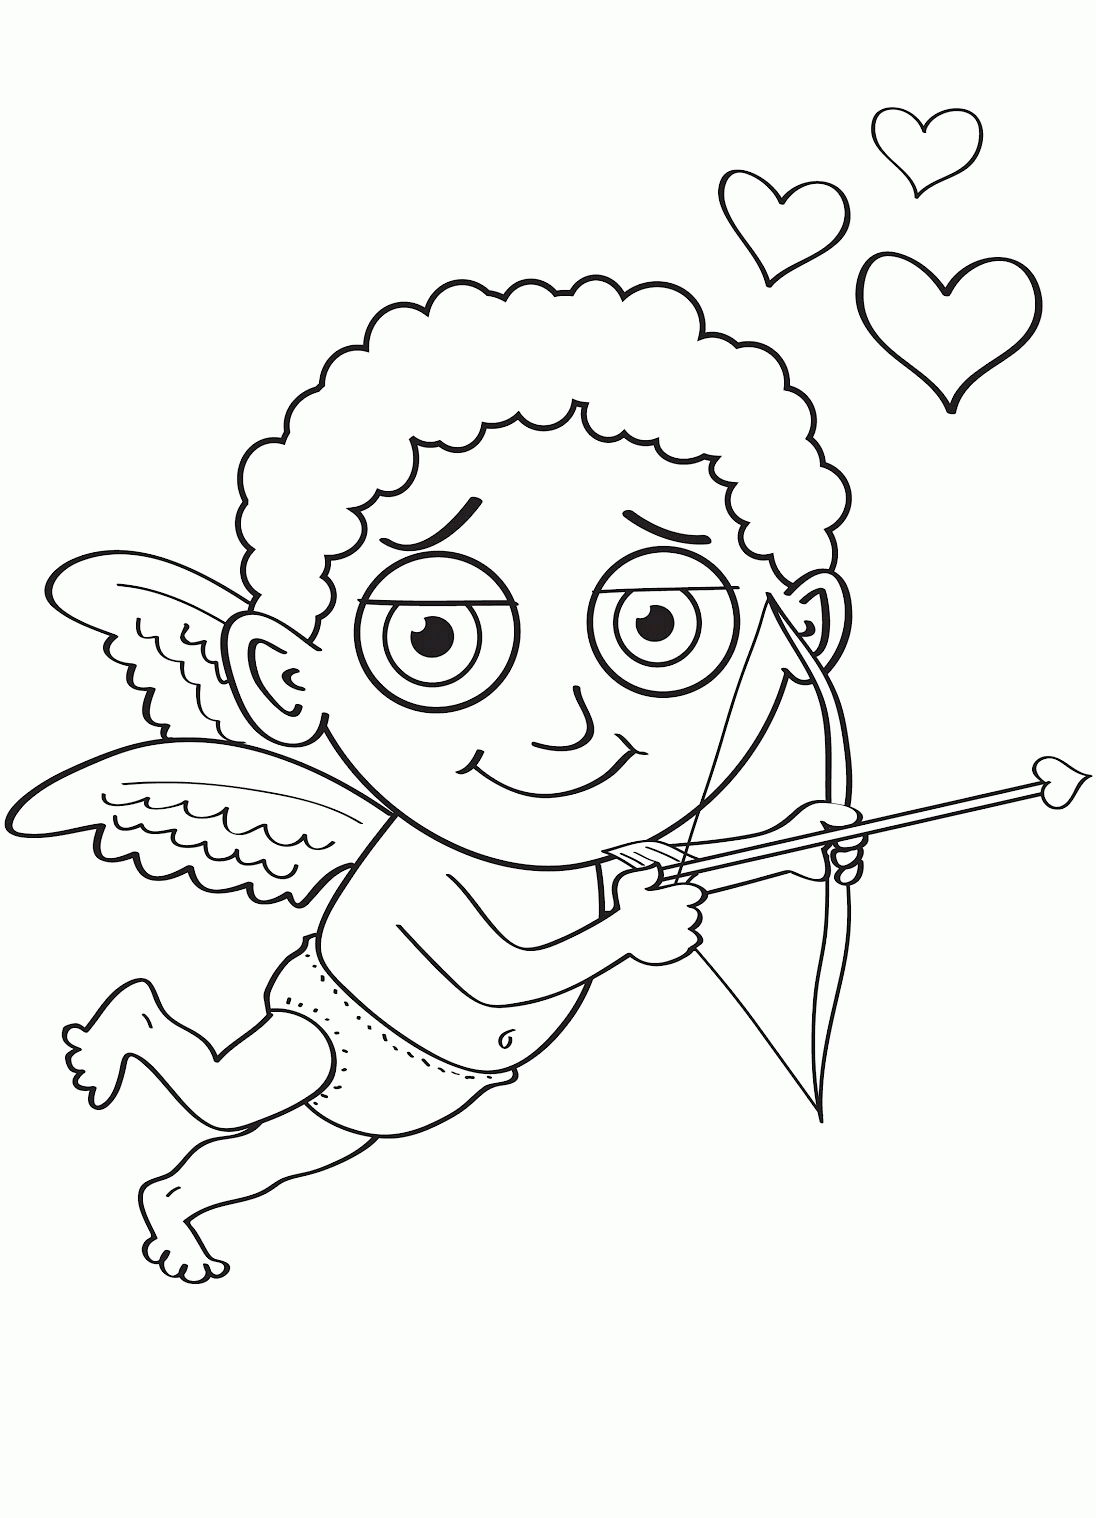 Printable Cupid Coloring Pictures Coloring Pages For Kids #cAz ...